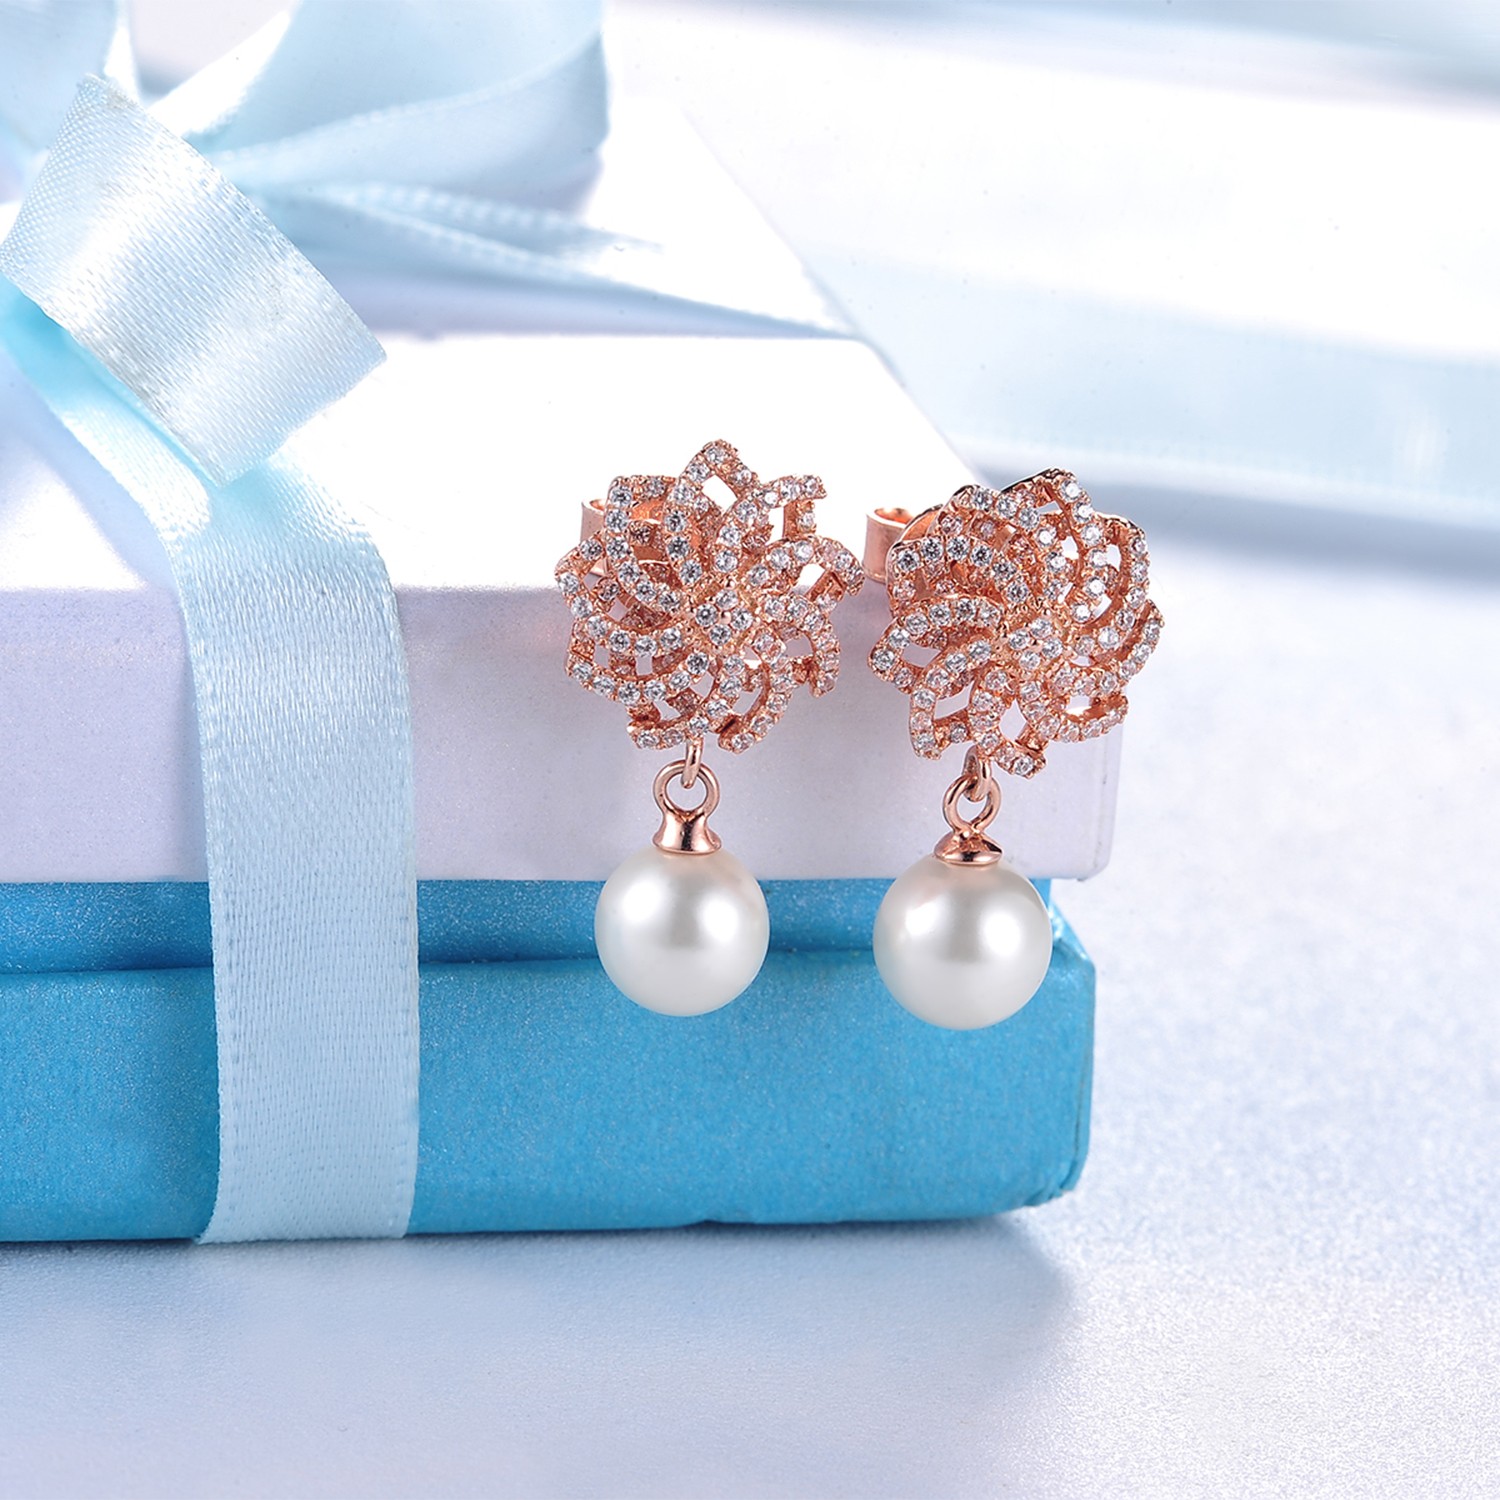 Hot selling Jewelry 925 Silver Rose Gold Plated Sweet Cute Flower White Pearl Earring Jewelry